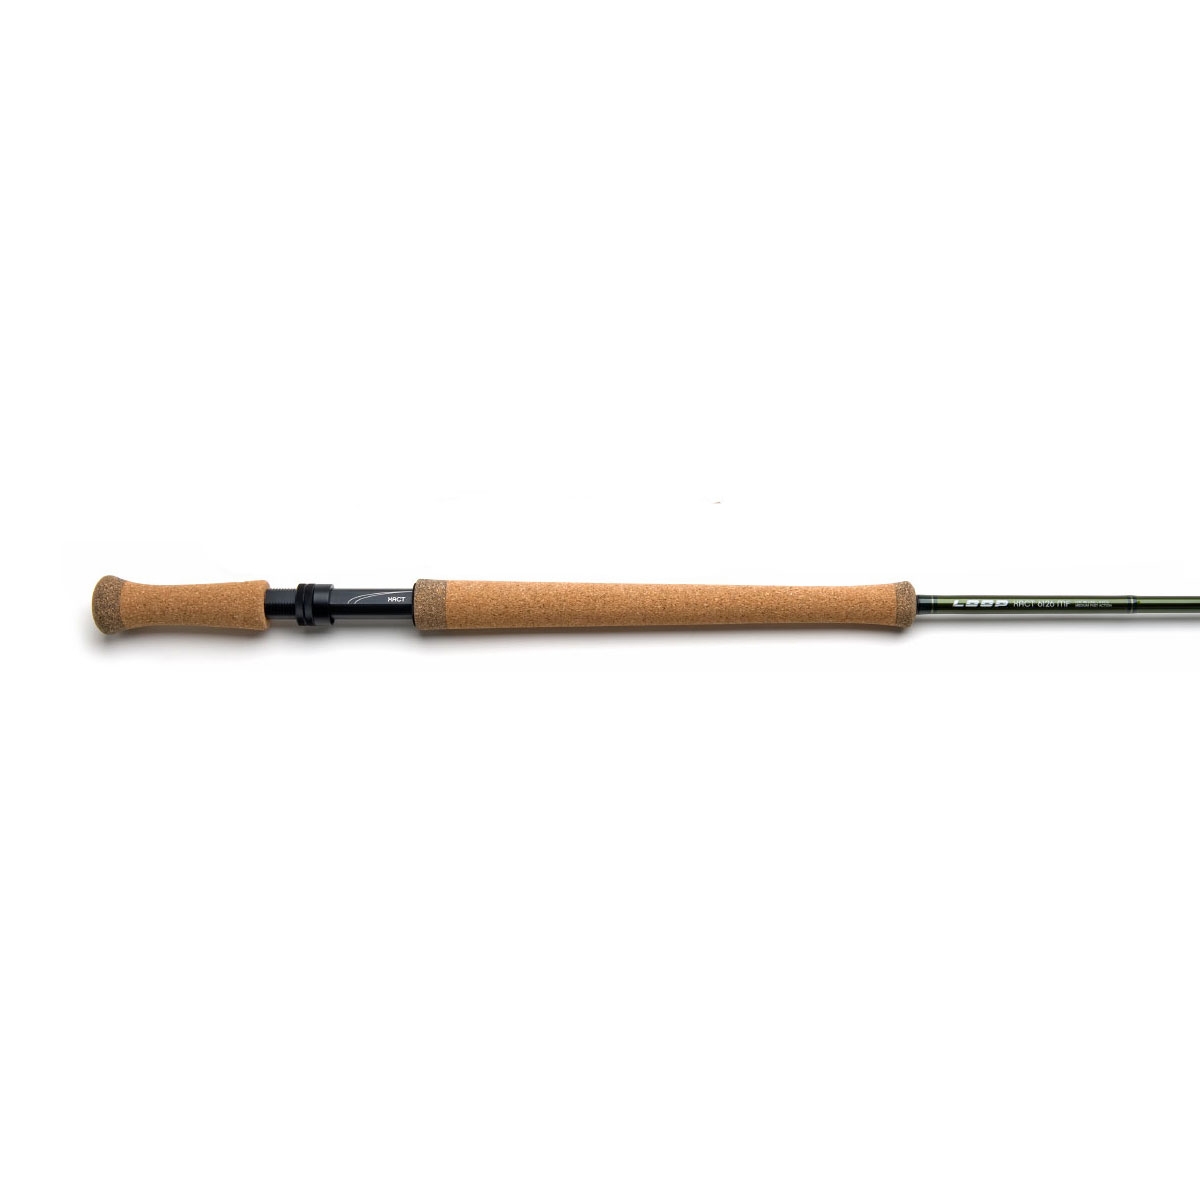 Hardy Demon Salt Fly Rod Review - Trident Fly Fishing